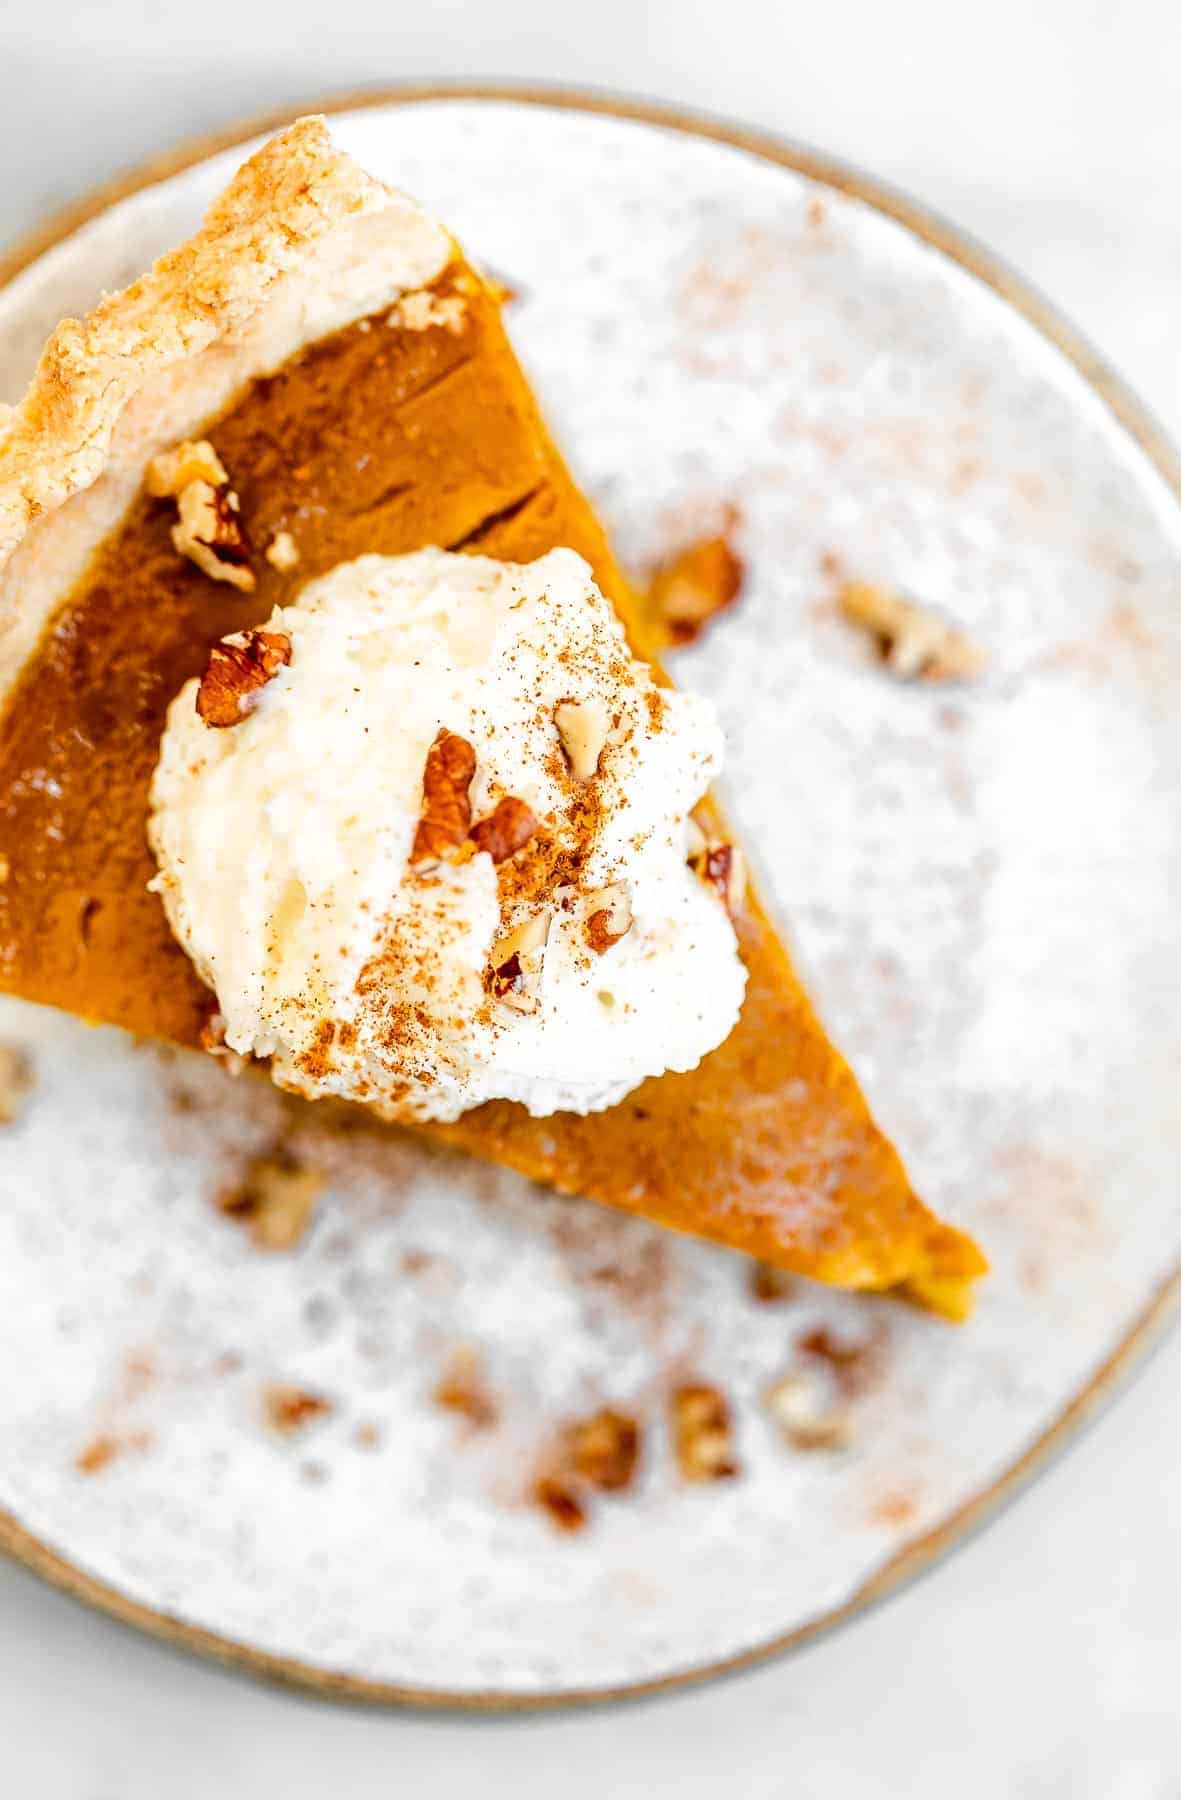 Overhead shot of vegan pumpkin pie with whipped cream on top.